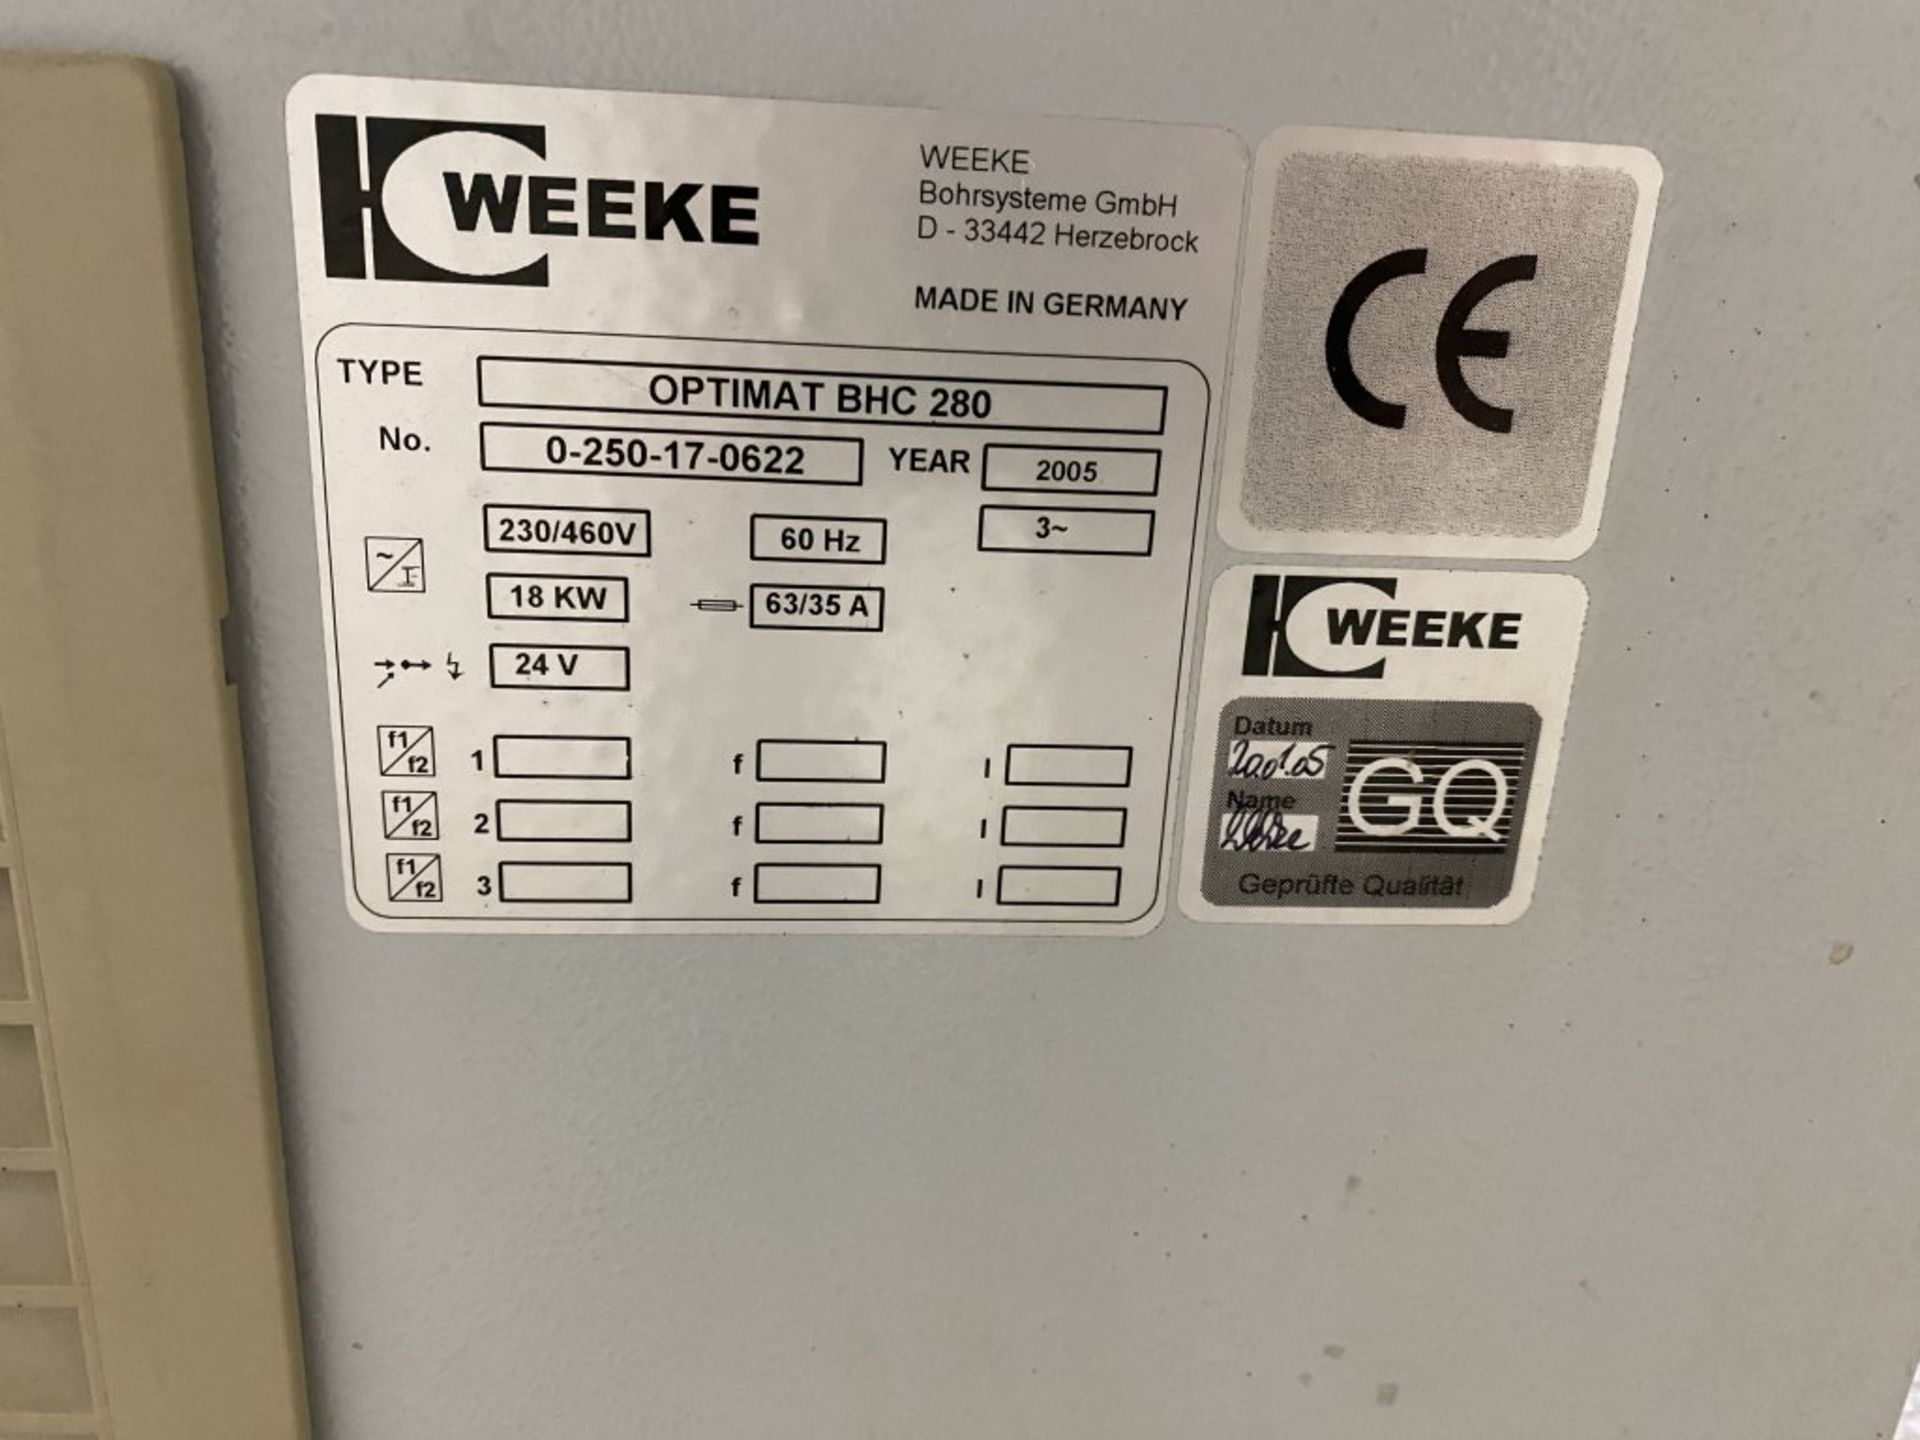 2005 WEEKE OPTIMAT BHC 280, 3/12, WITH CONTROL CENTER, S/N: 0-250-17-0622, 230/460V, 3-PHASE, WITH - Image 24 of 31